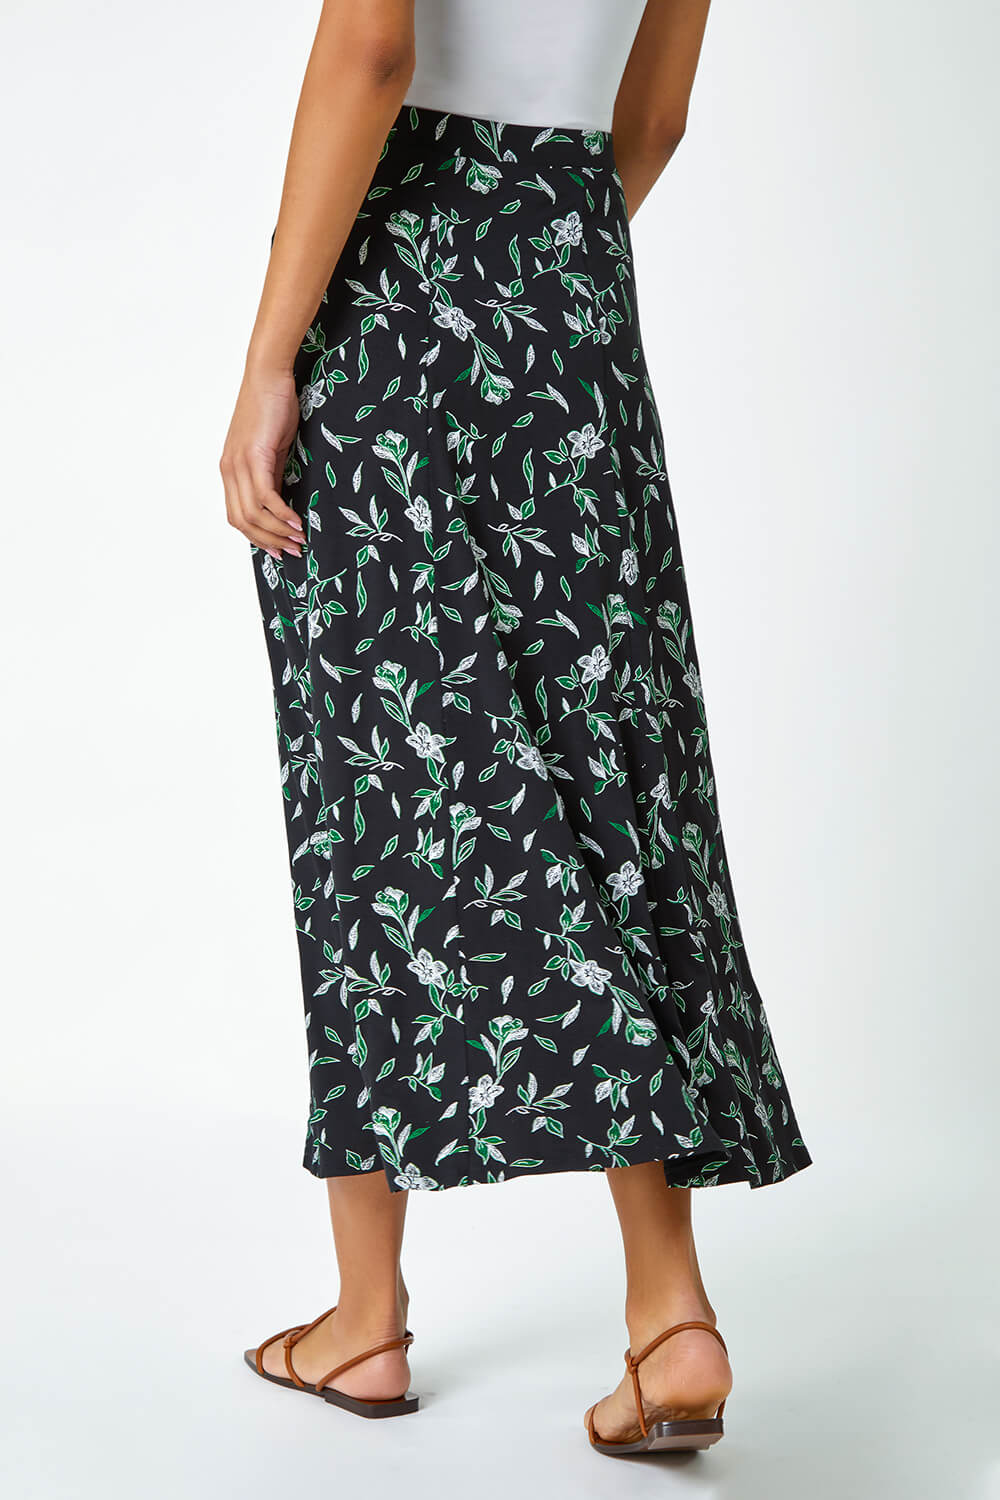 Green Floral Leaf Stretch Jersey Midi Skirt, Image 3 of 5